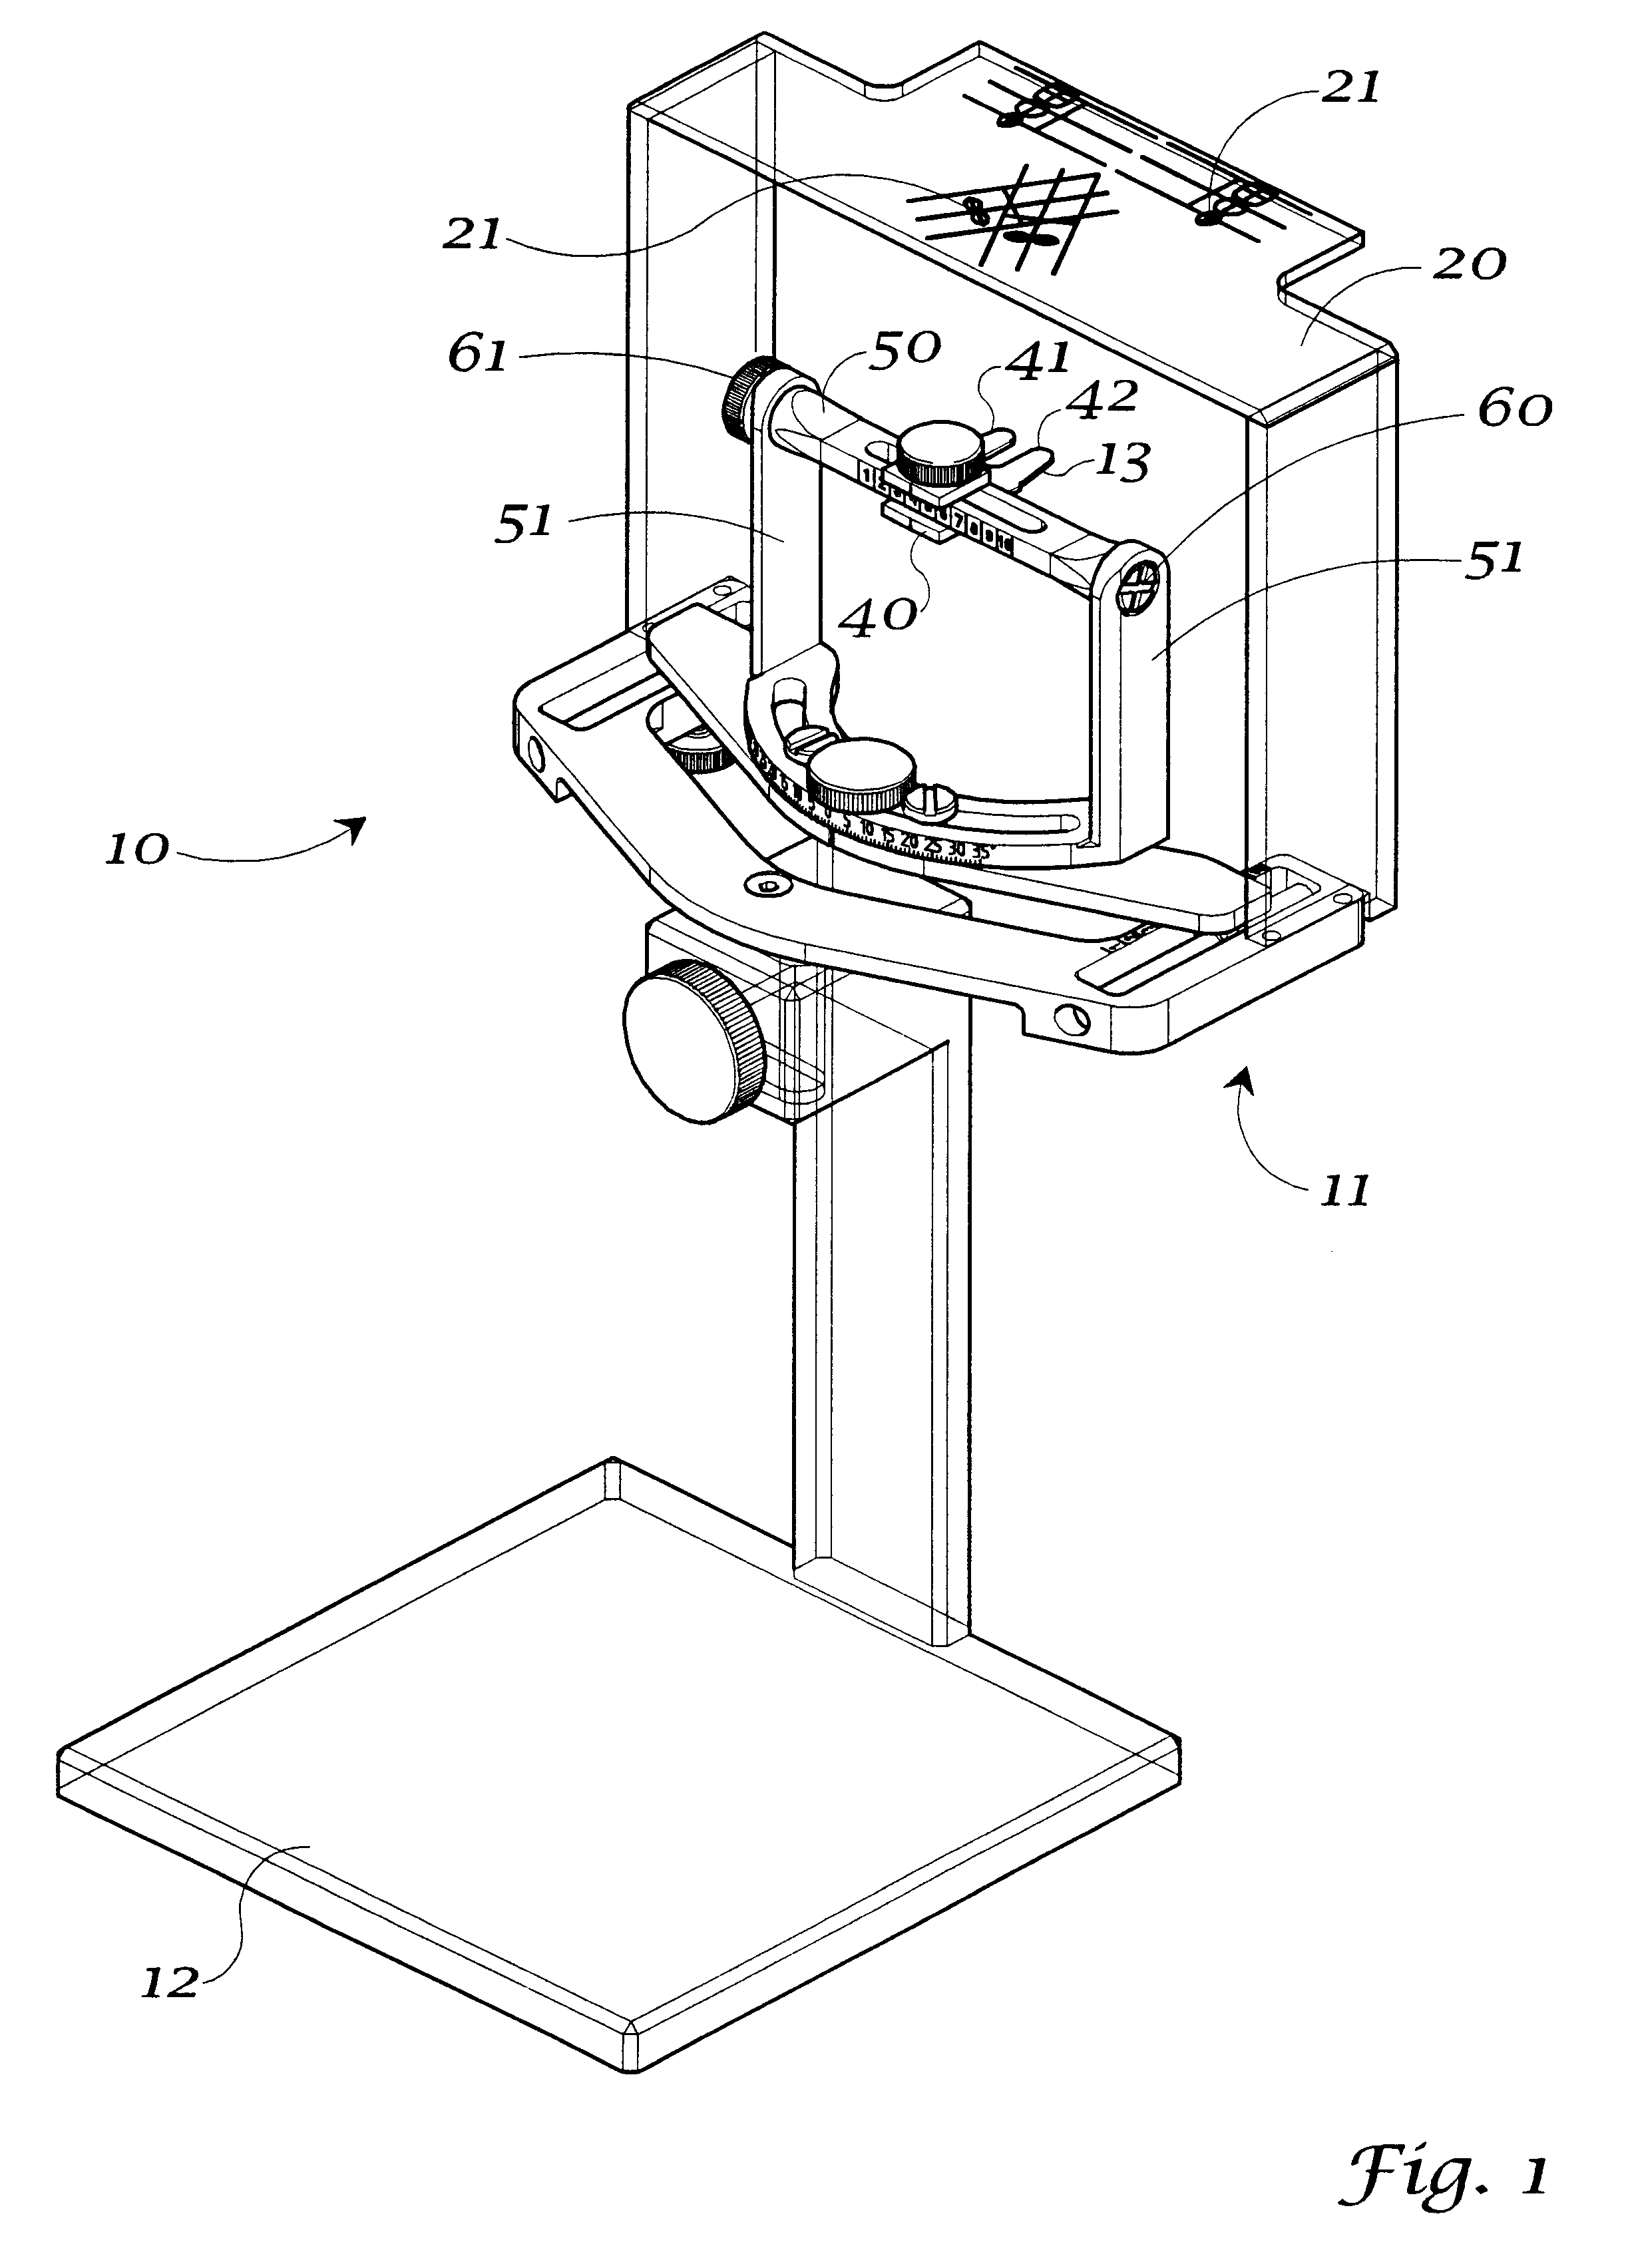 Positioning apparatus and method for transversal dental x-ray tomography